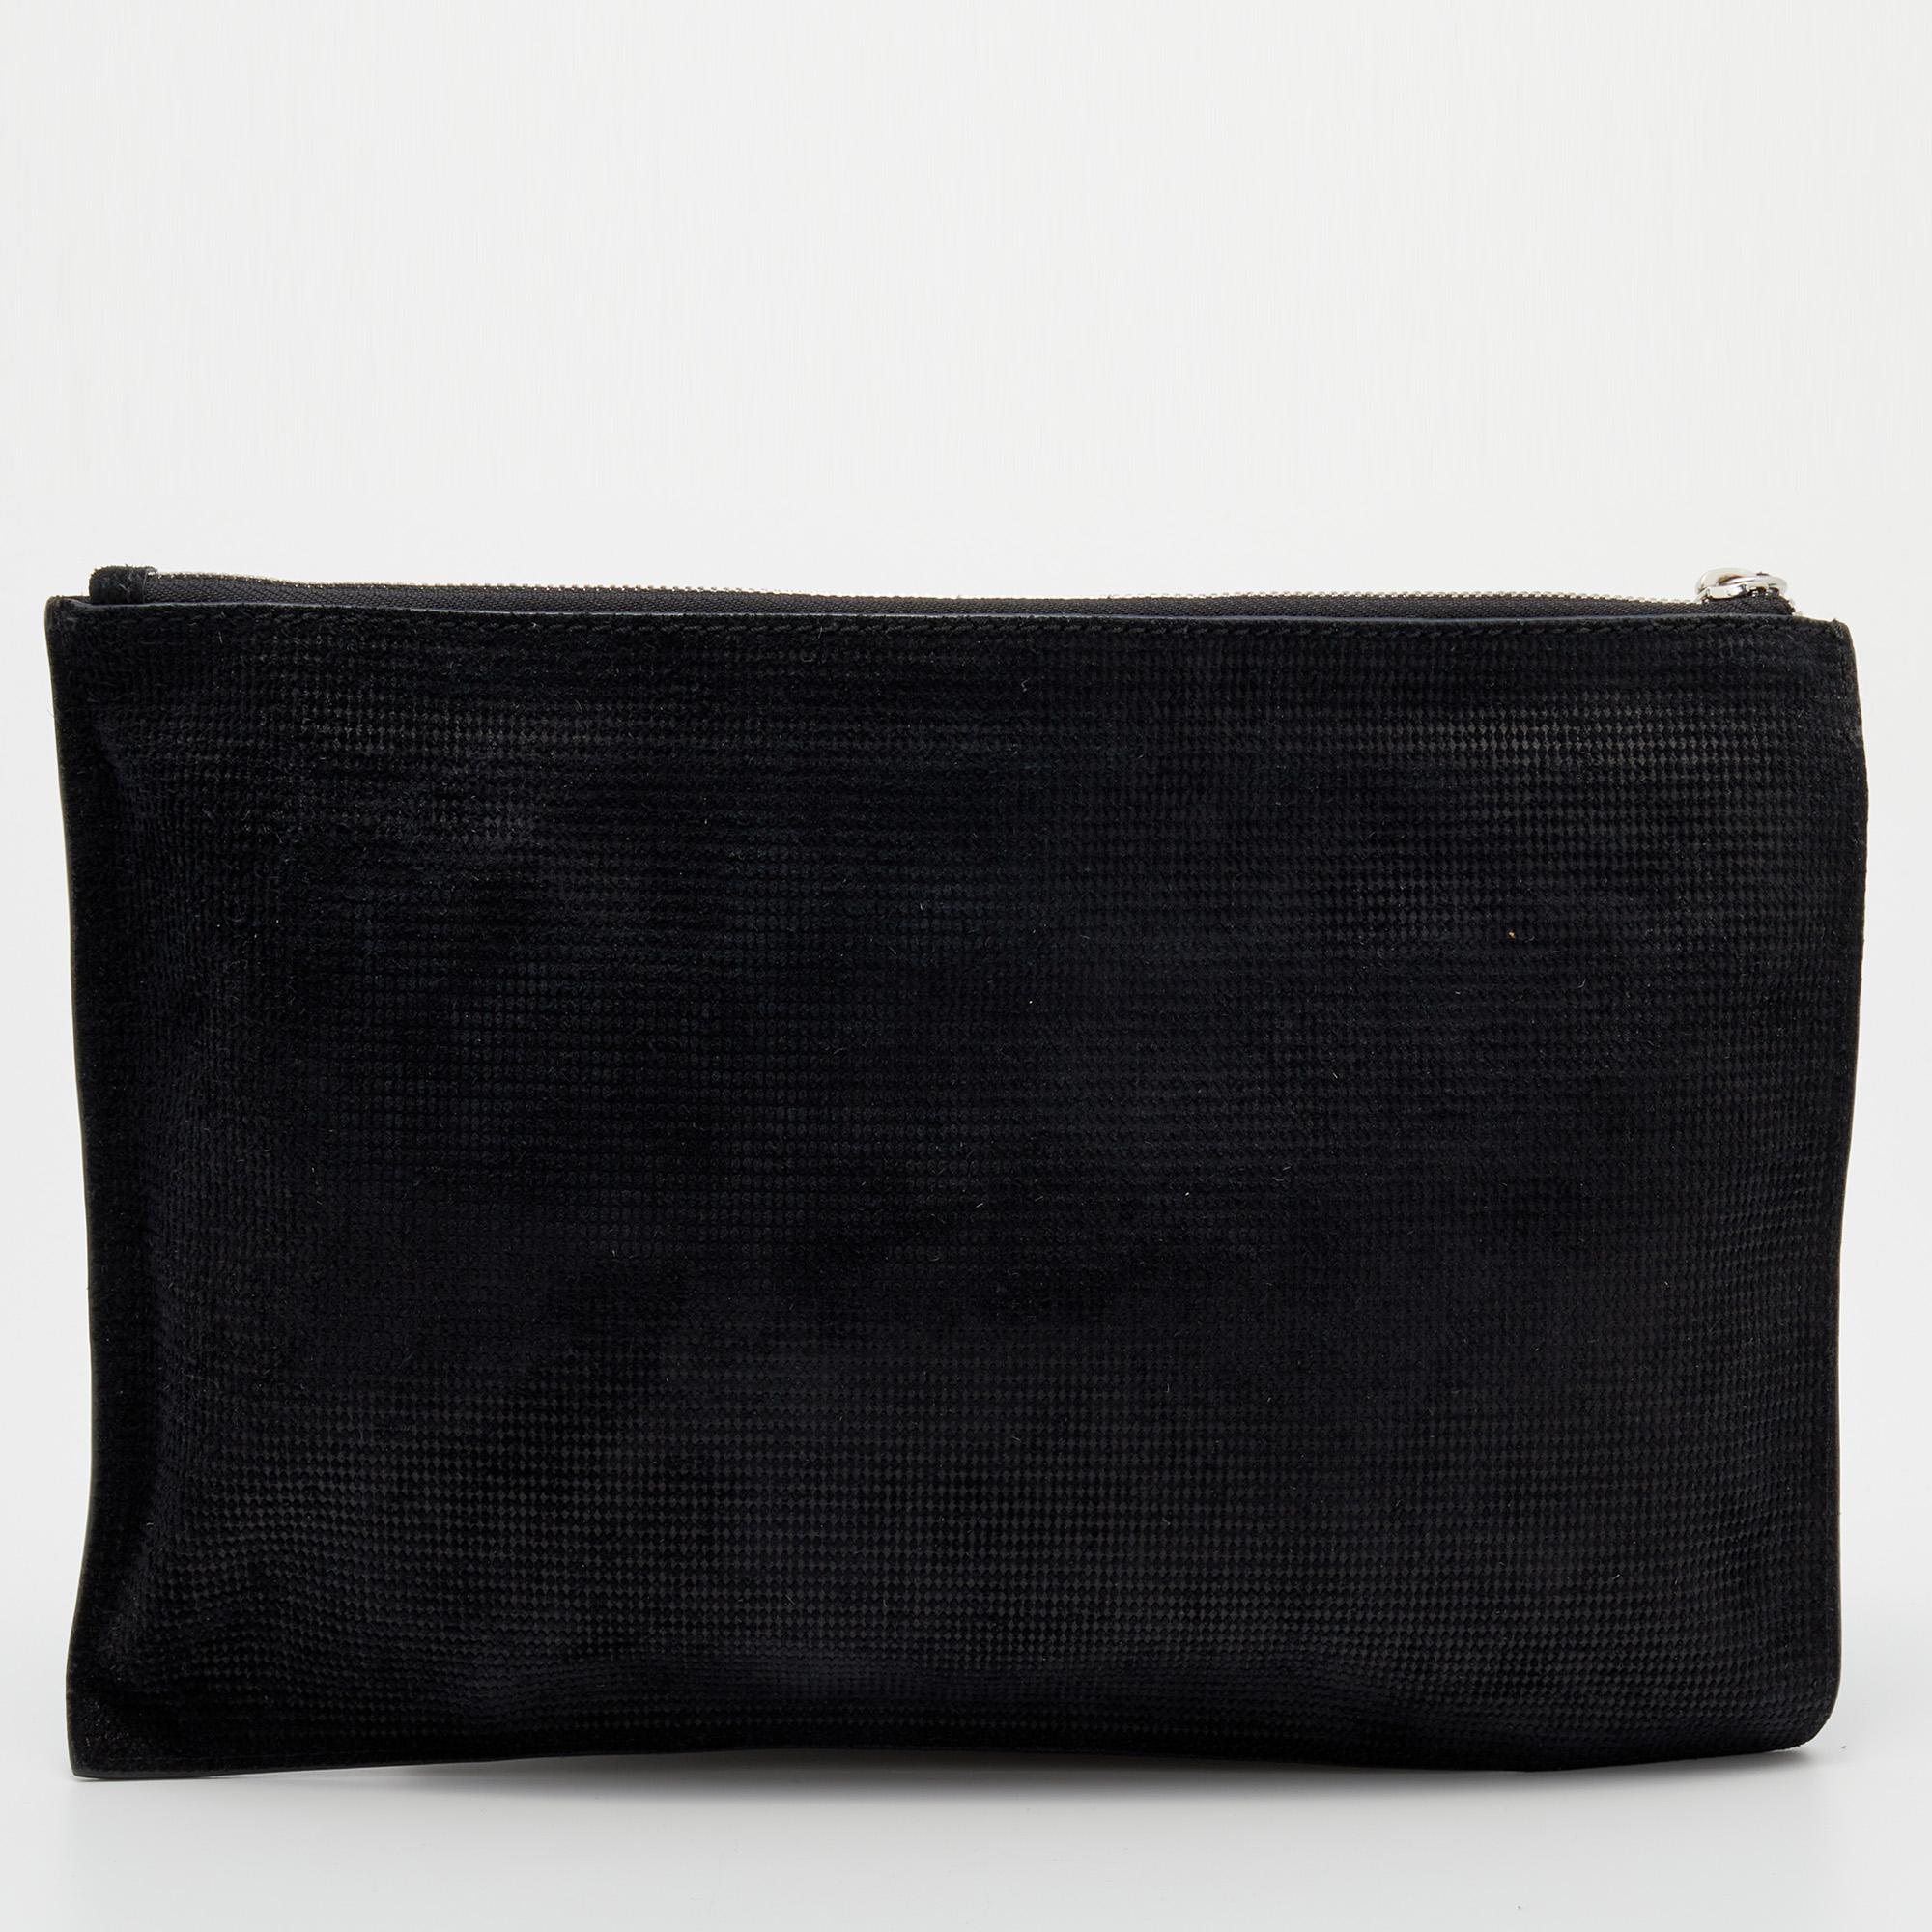 If you love to travel light, then this Alexander McQueen clutch is the apt choice for you. Made from nubuck leather, its top zipper closure secures the canvas-lined interior and it is added with an eye-catching wristlet.

Includes: Info Booklet